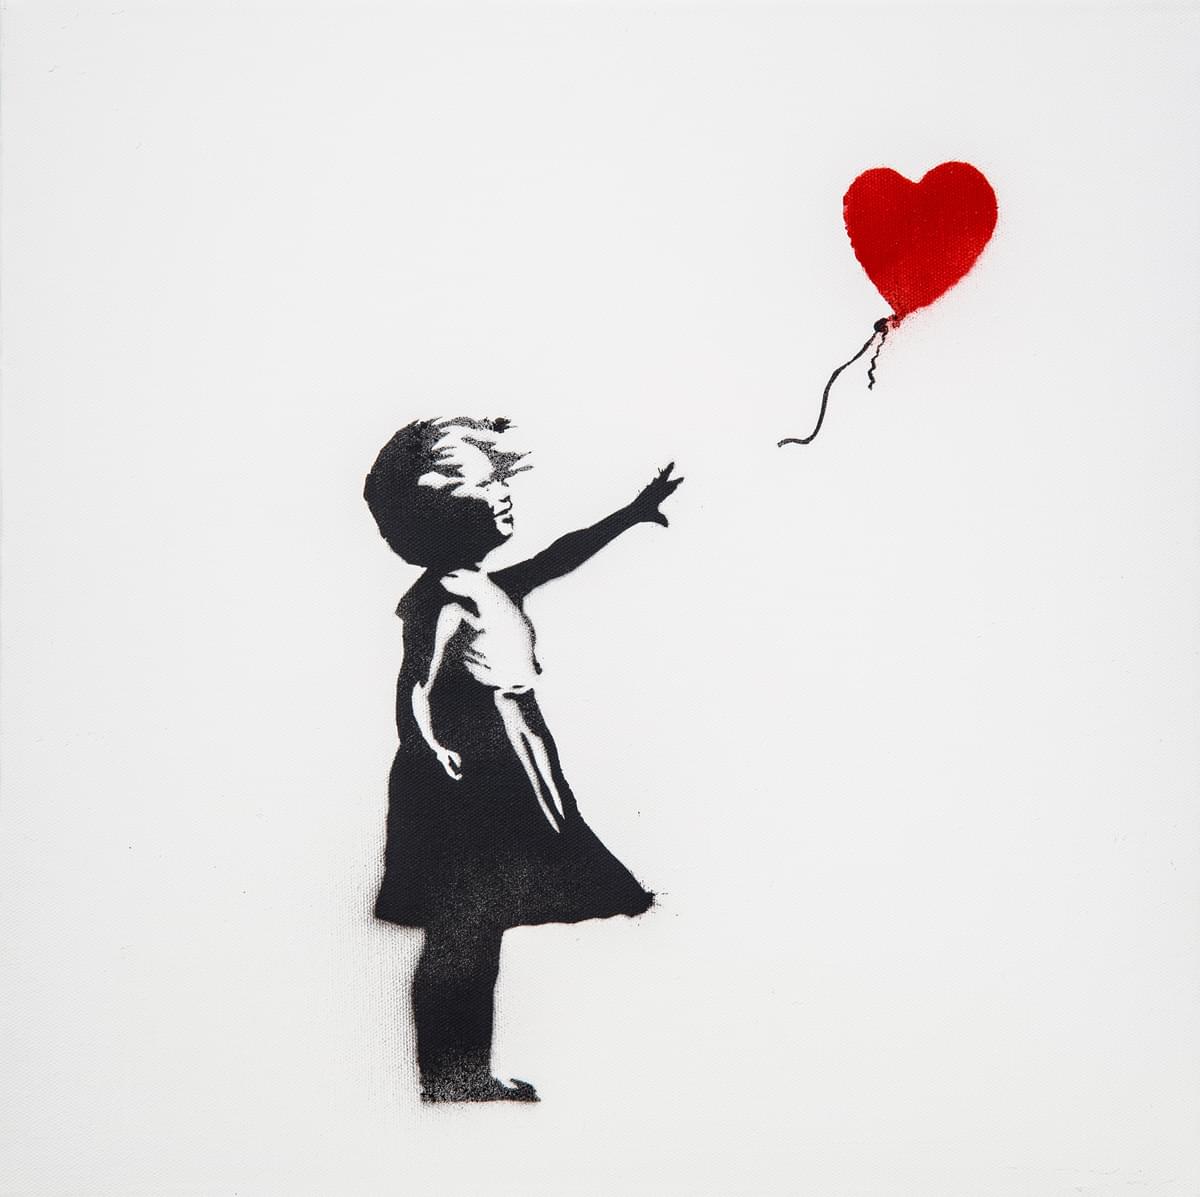 Banksy Girl with Balloon original spray paint stencil on canvas from edition of 25 signed numbered and dated by the artist